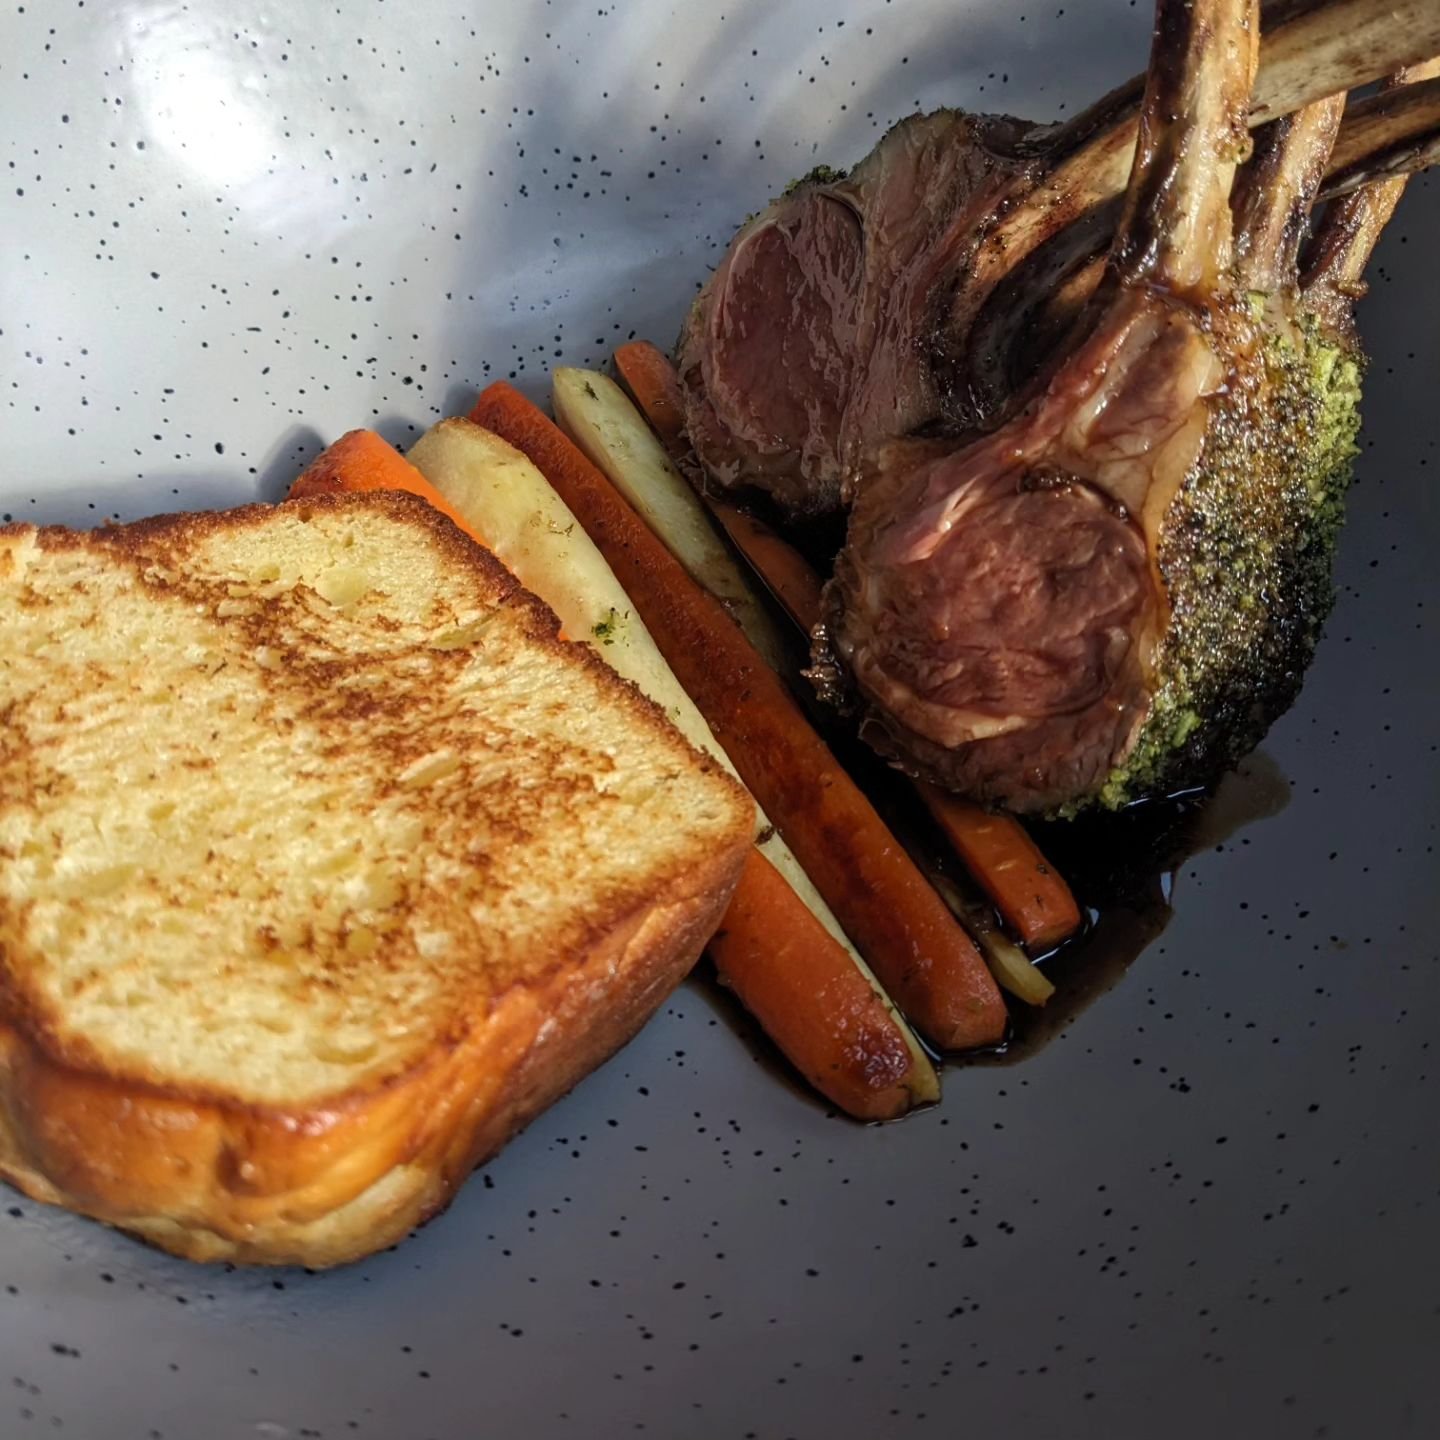 And now the main event! Naturally the best main course choices come from the wild fey. The hunting court, overseen by the Erlking and leader of the wild hunt. They prefer a good bone in cut like this melt in your mouth herb crusted rack of lamb. To a